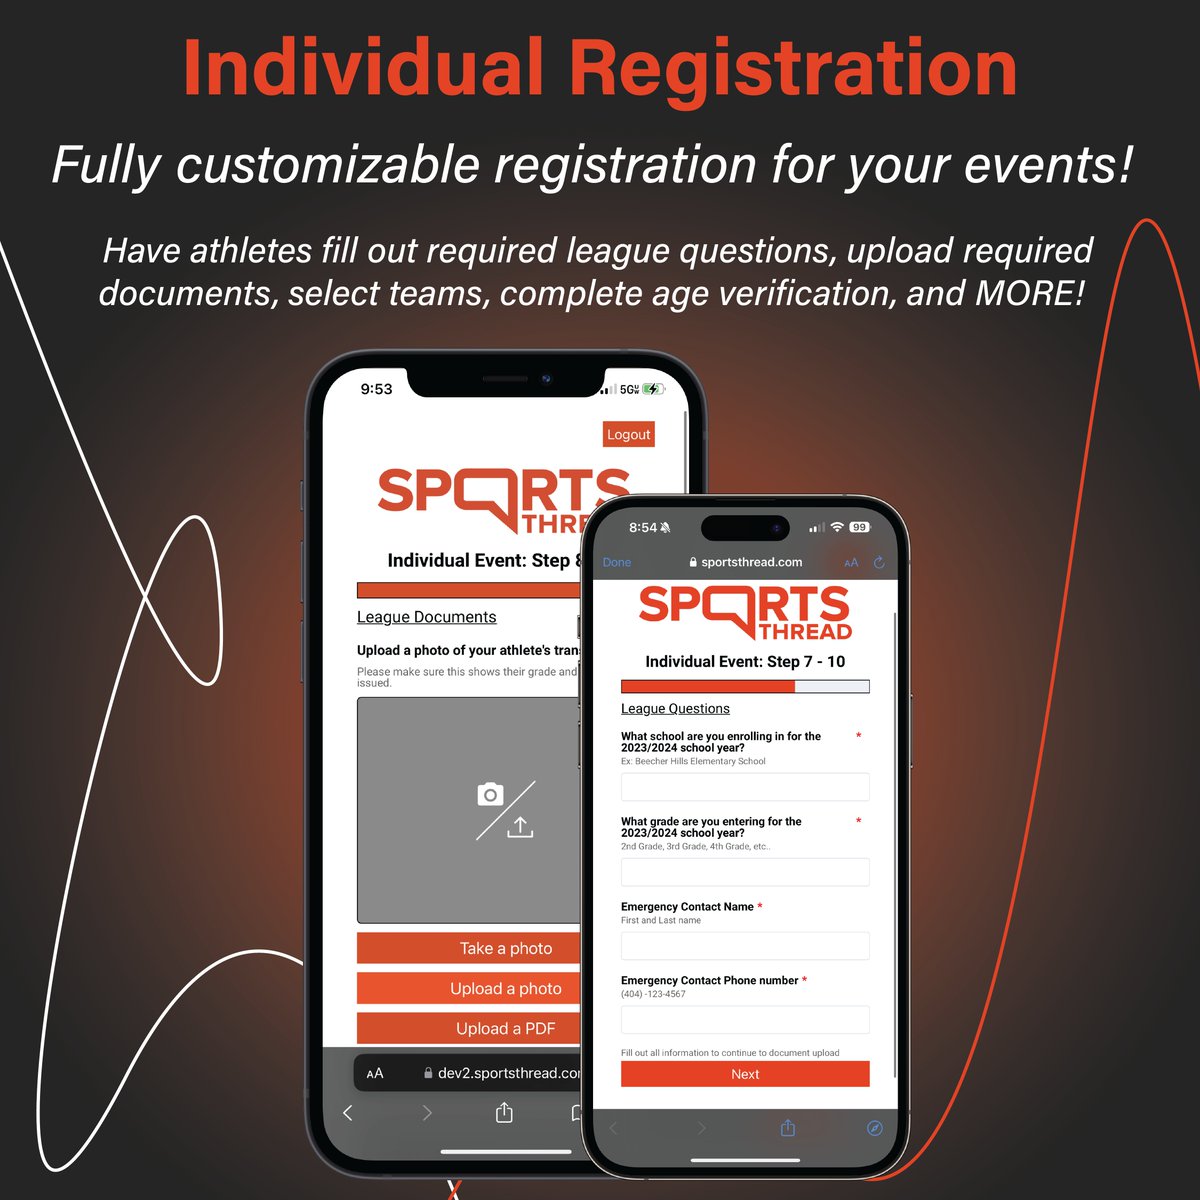 Fully customizable registration for your events! 🔥🙌 Learn more today ⬇️⬇️⬇️ info.sportsthread.com/contact